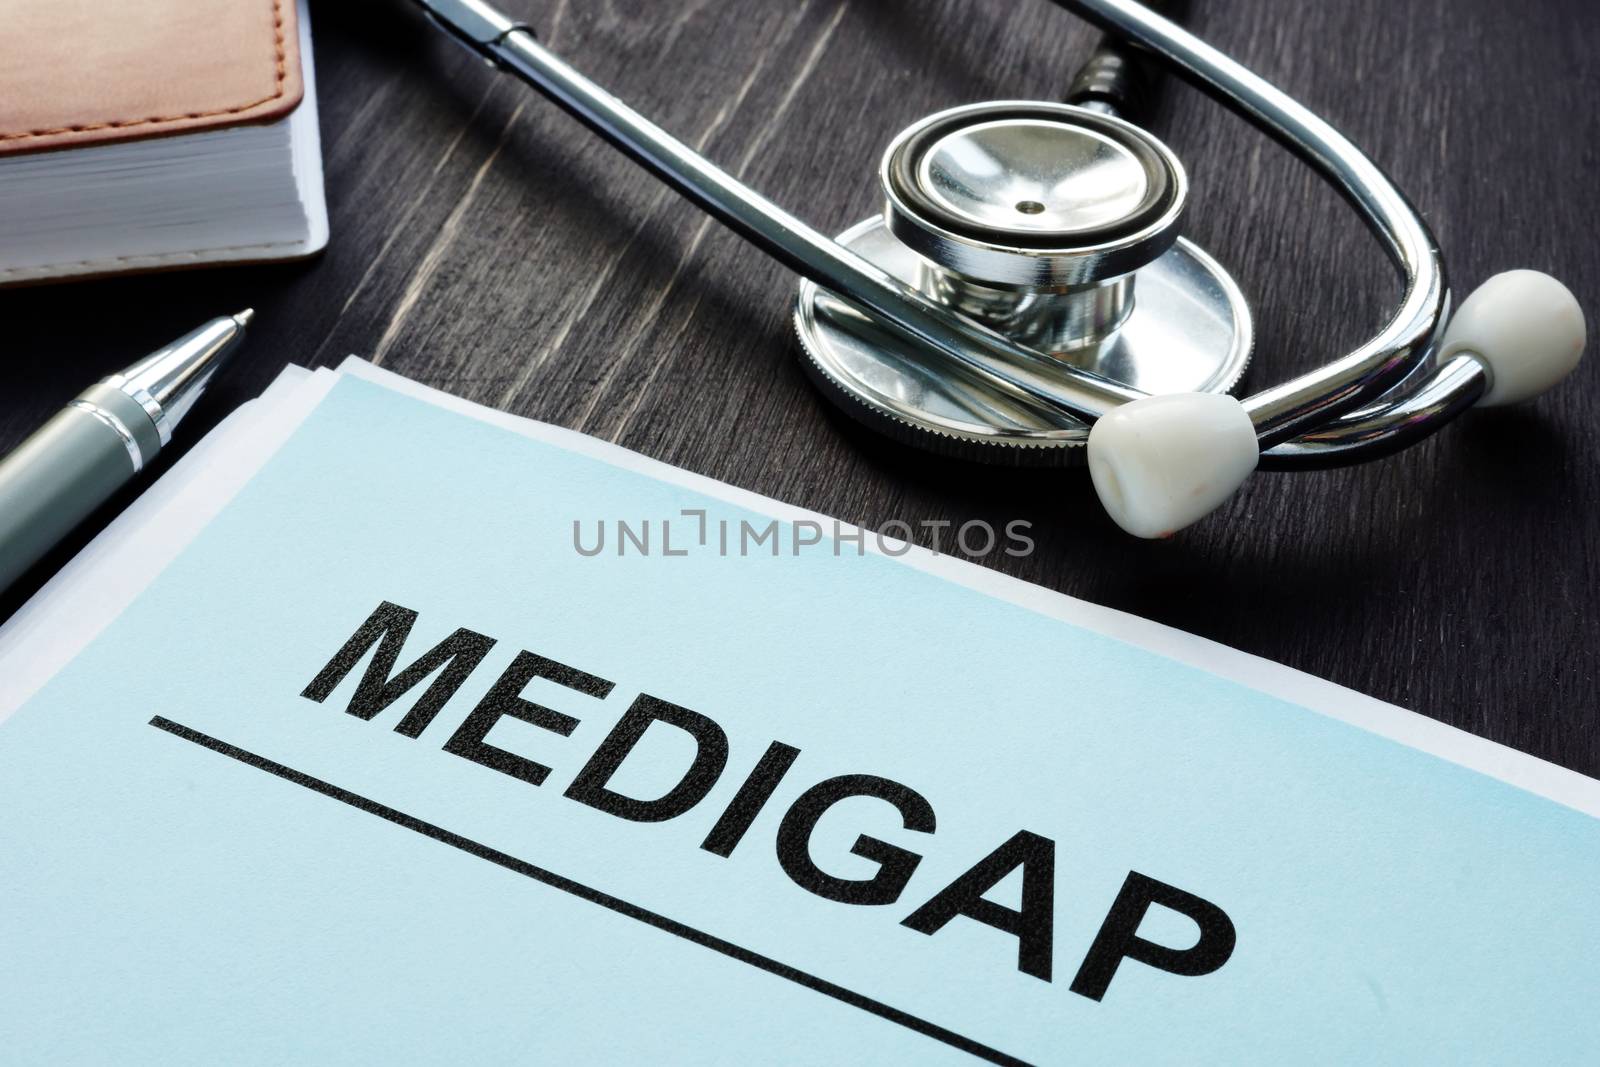 Medigap Medicare Supplement Health Insurance papers and stethoscope. by designer491